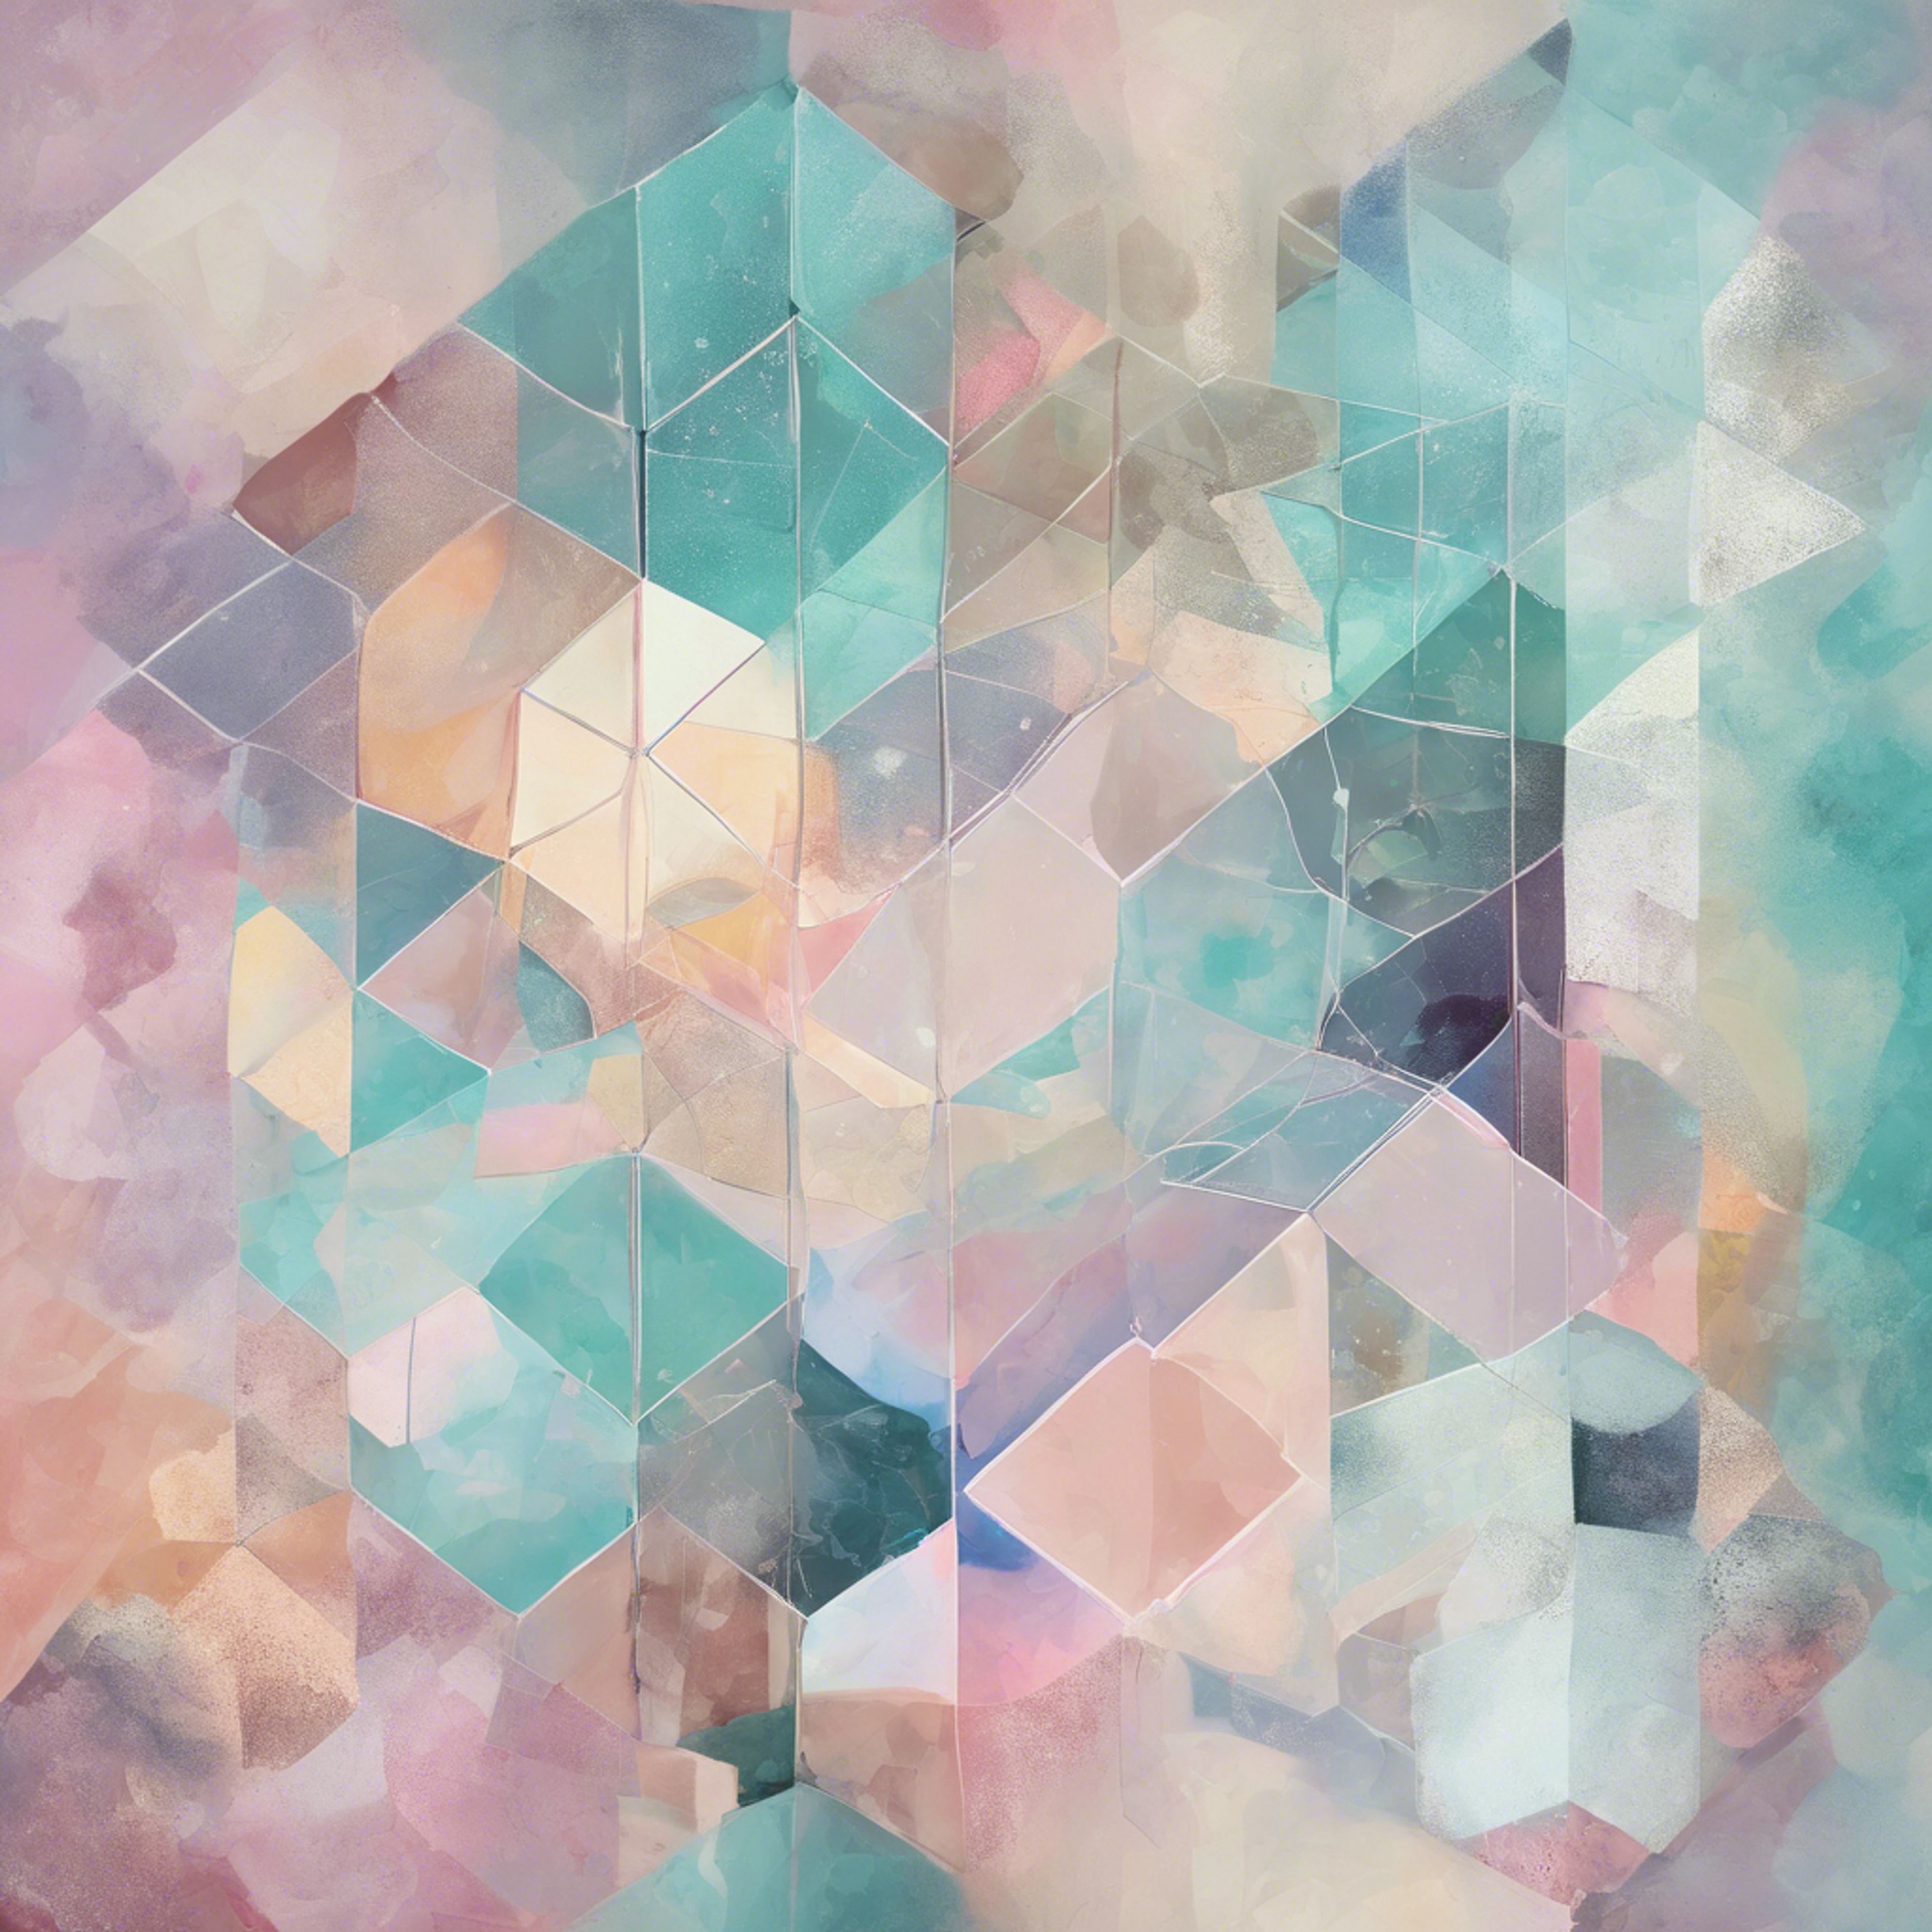 A cool pastel colored abstract painting emphasizing geometric patterns. Tapeet[4610bdb5de564f779c91]